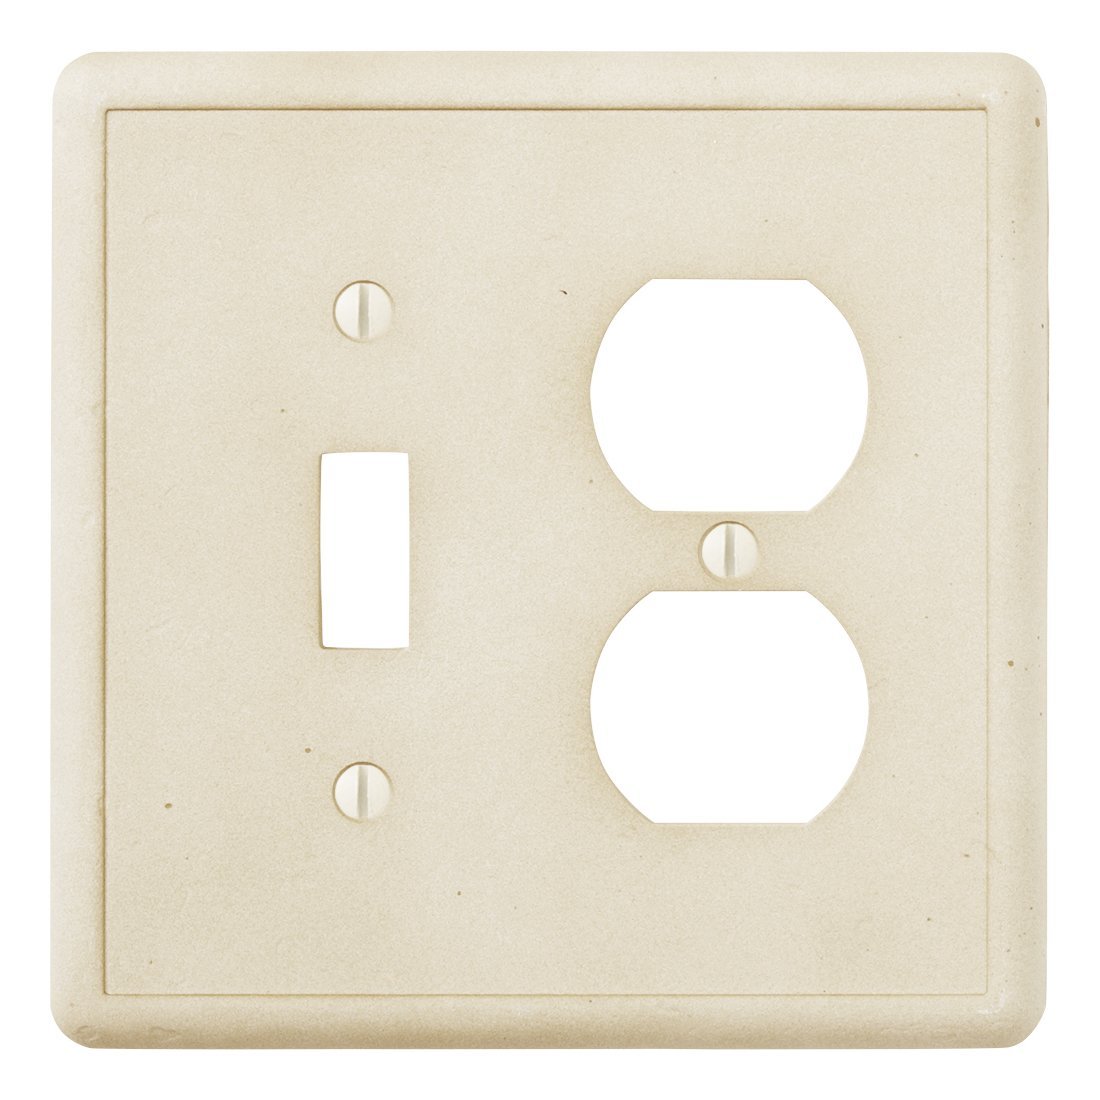 Choose Questech Somerset Sienna Cornice Cast Stone Switch Outlet Covers 